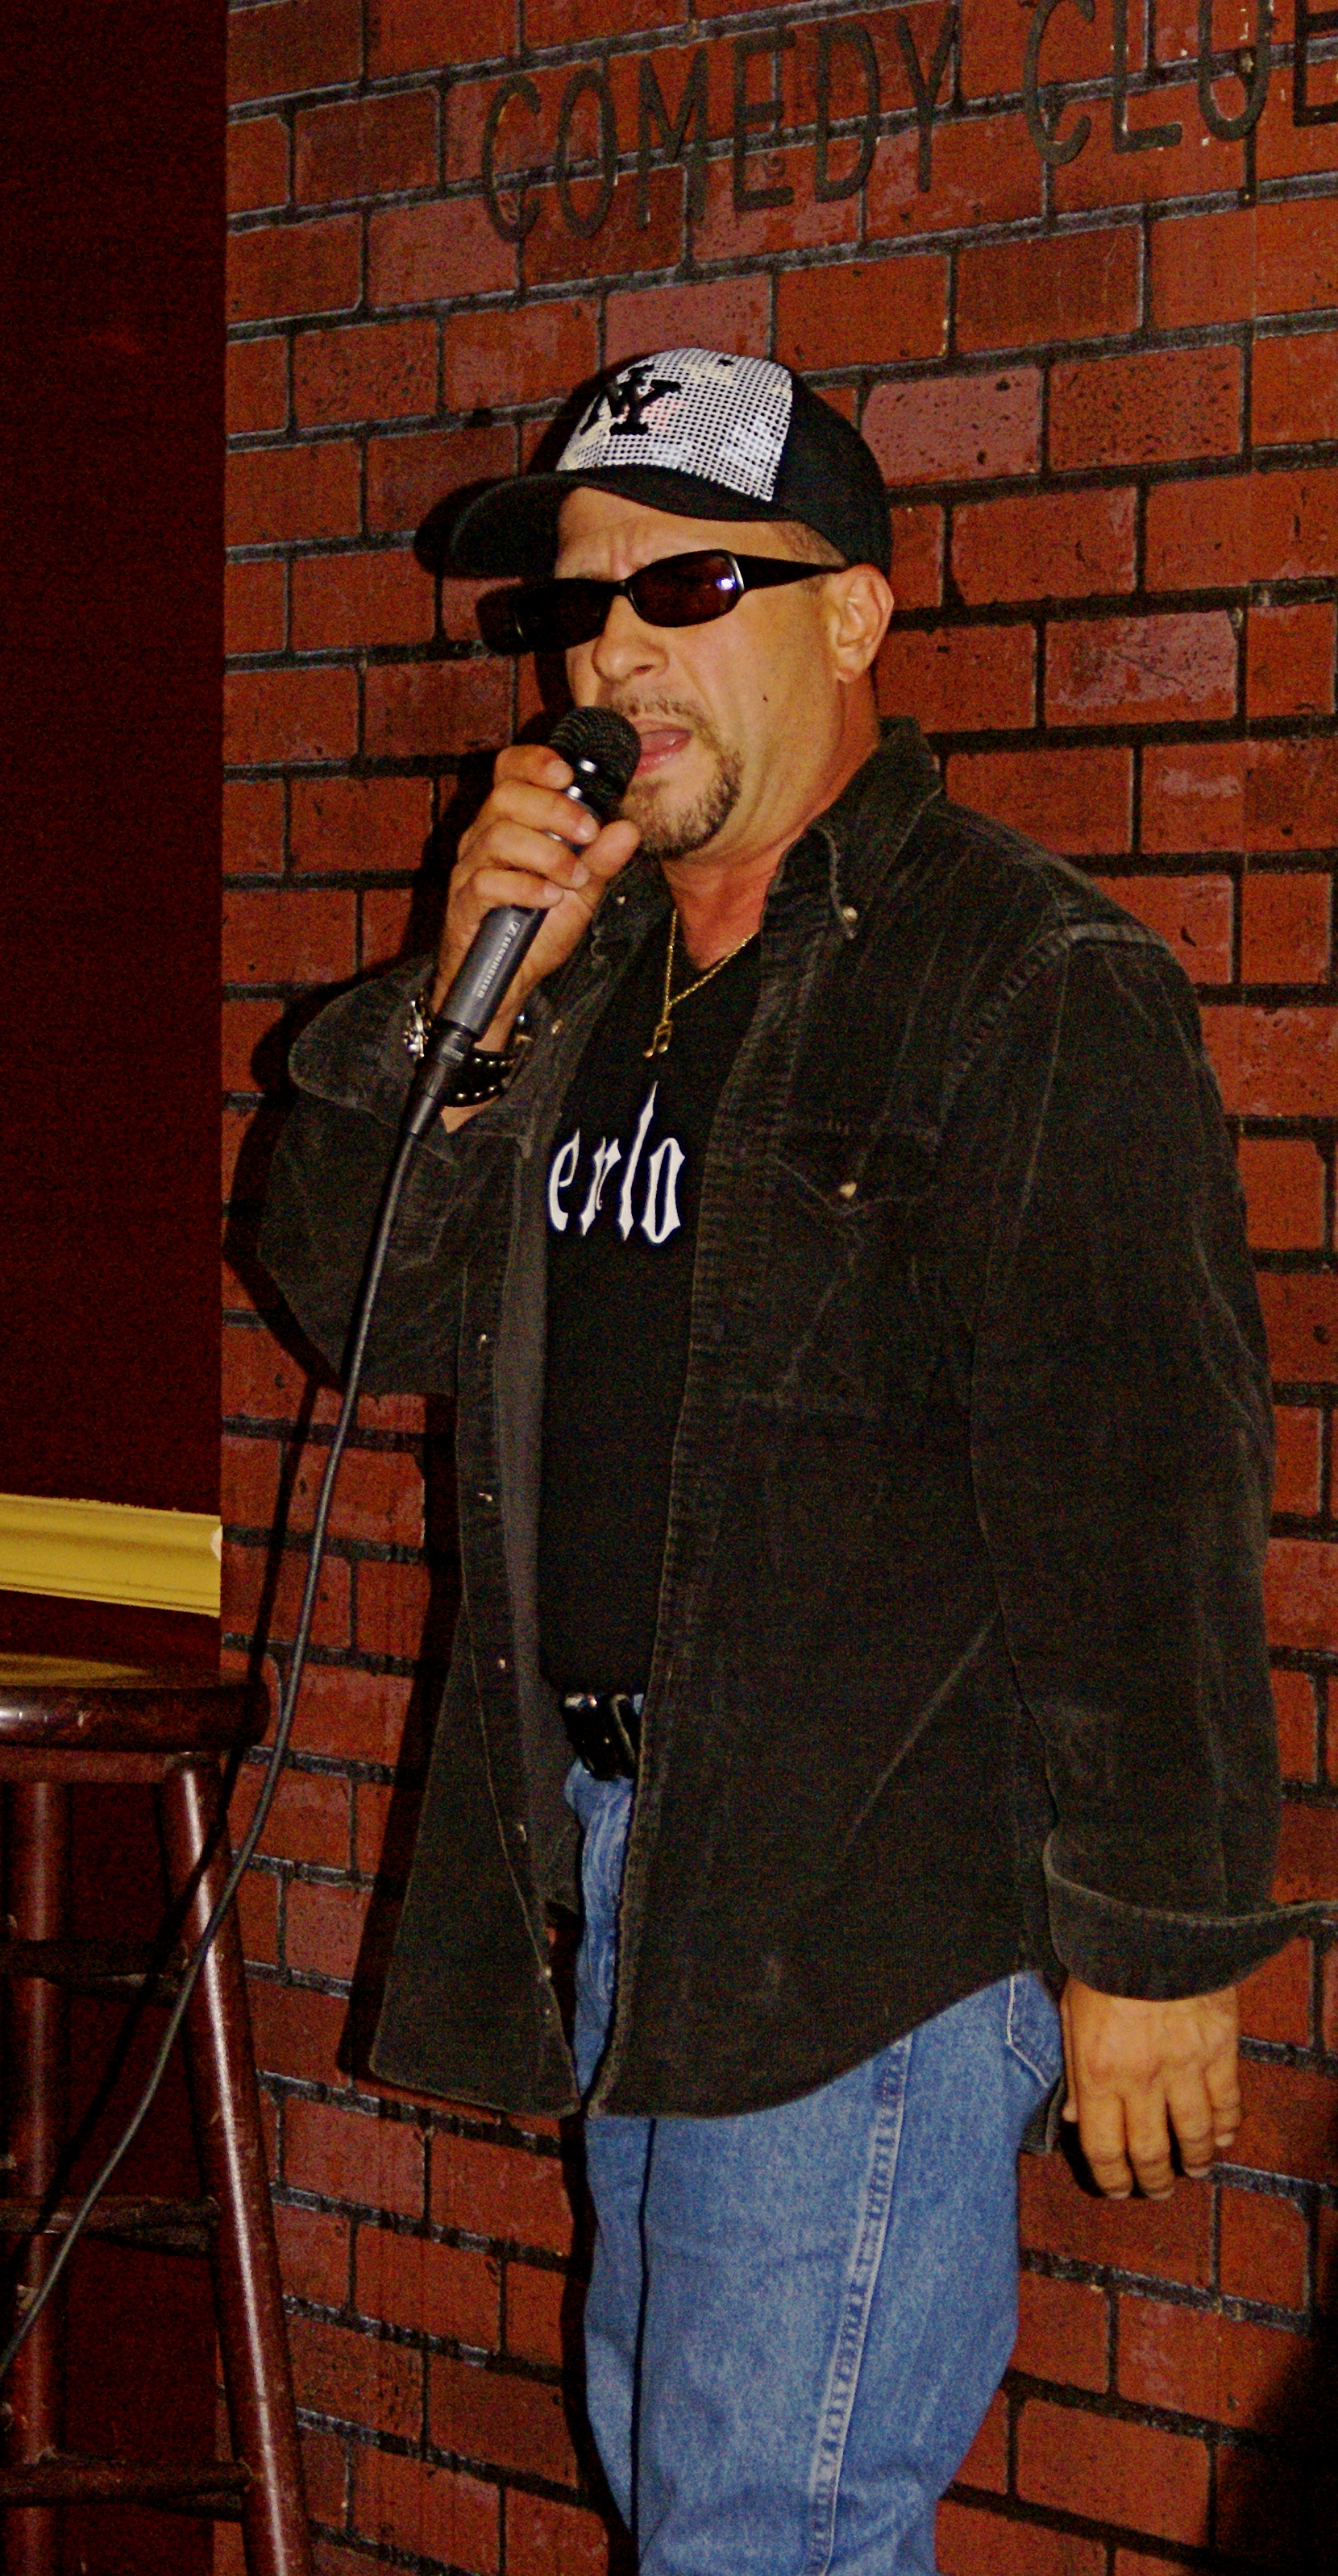 Tony on stage doing standup at New York Comedy Club in the Sheba Mason Show.